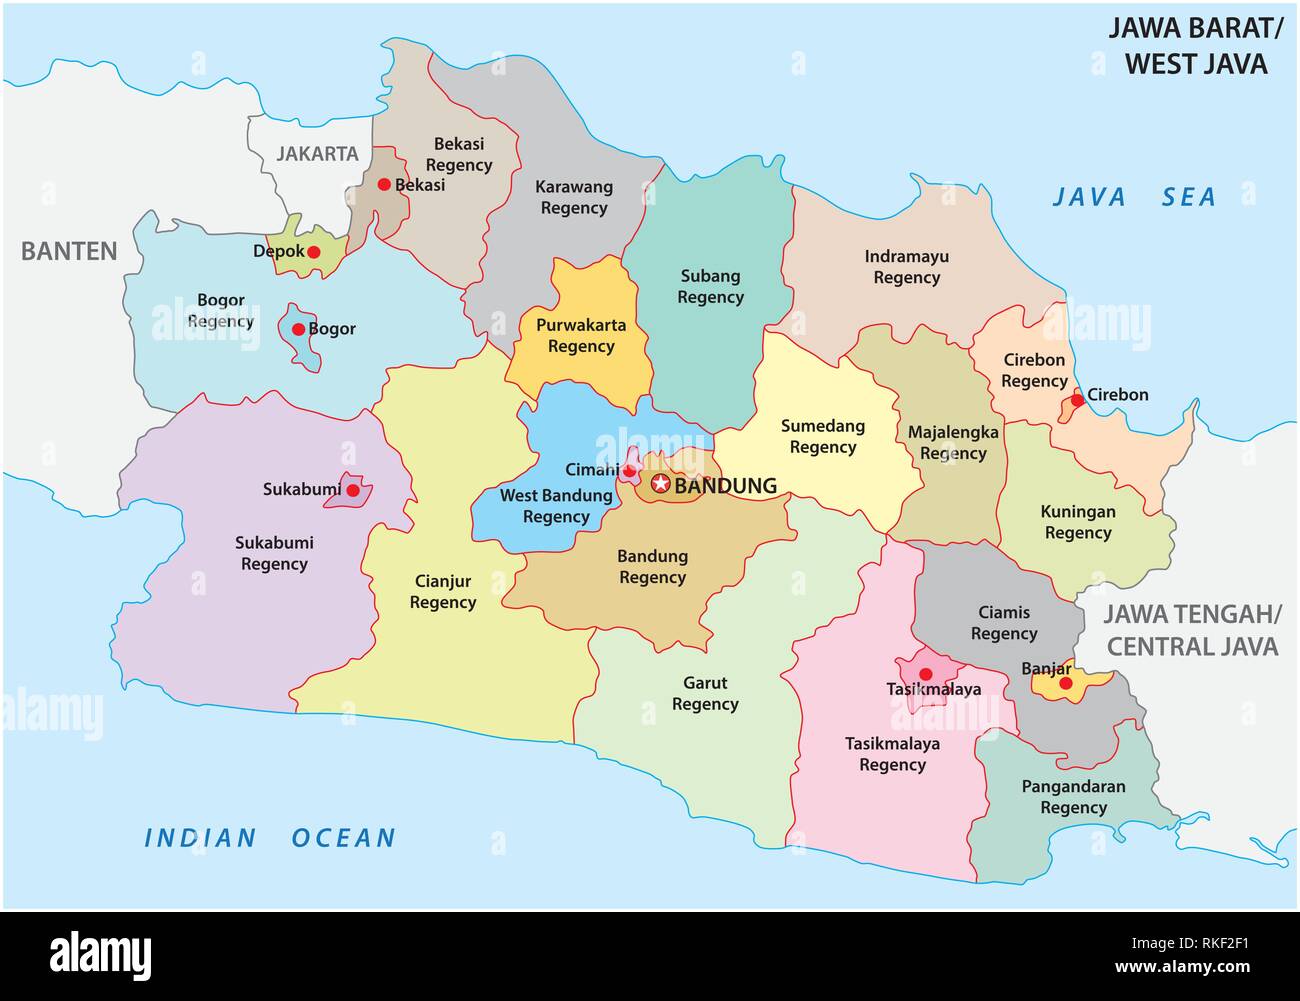 Jawa Barat, West Java administrative and political vector map, Indonesia Stock Vector